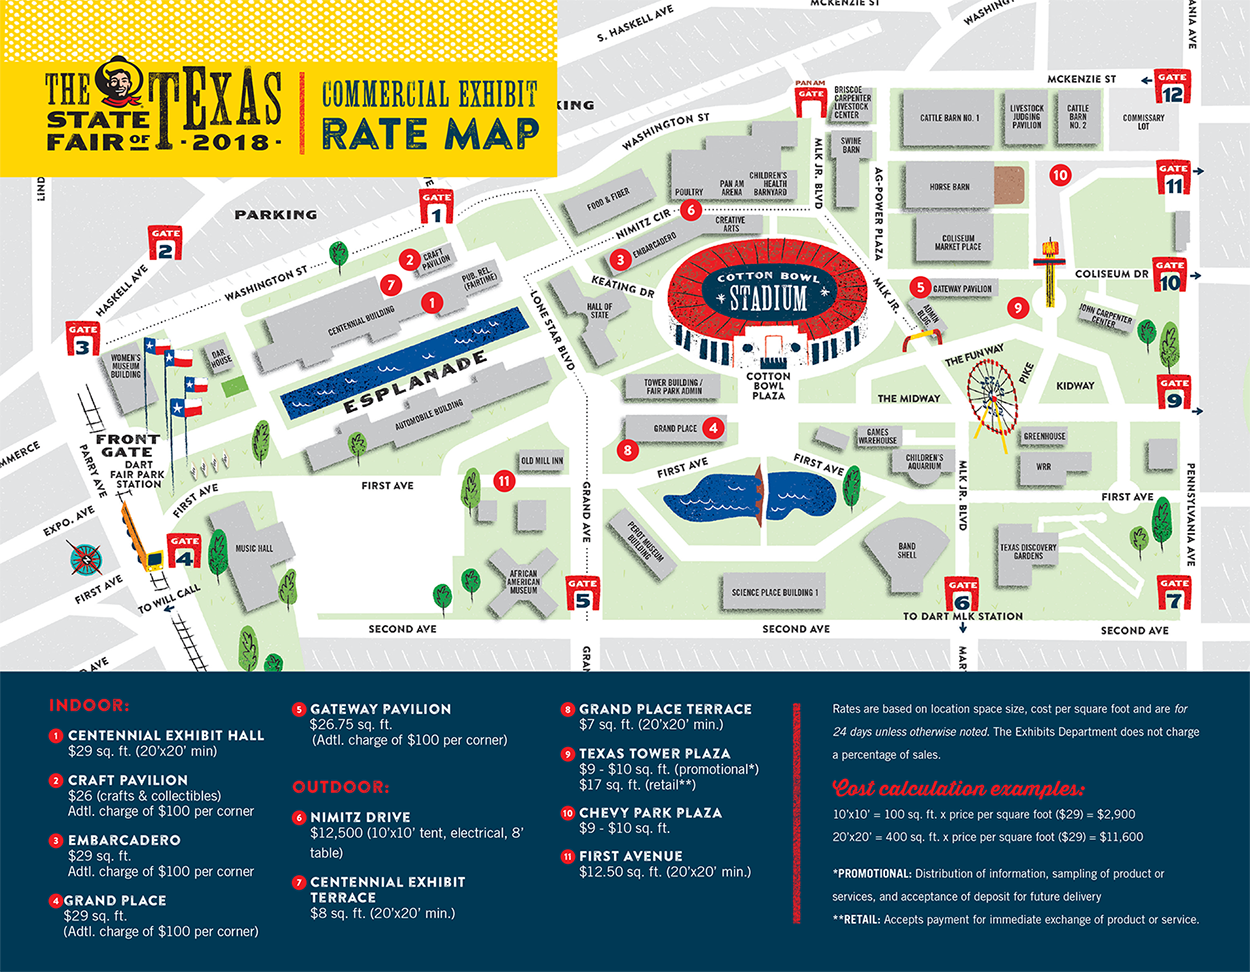 fair park parking map 2018 Exhibitors Rate Map State Fair Of Texas